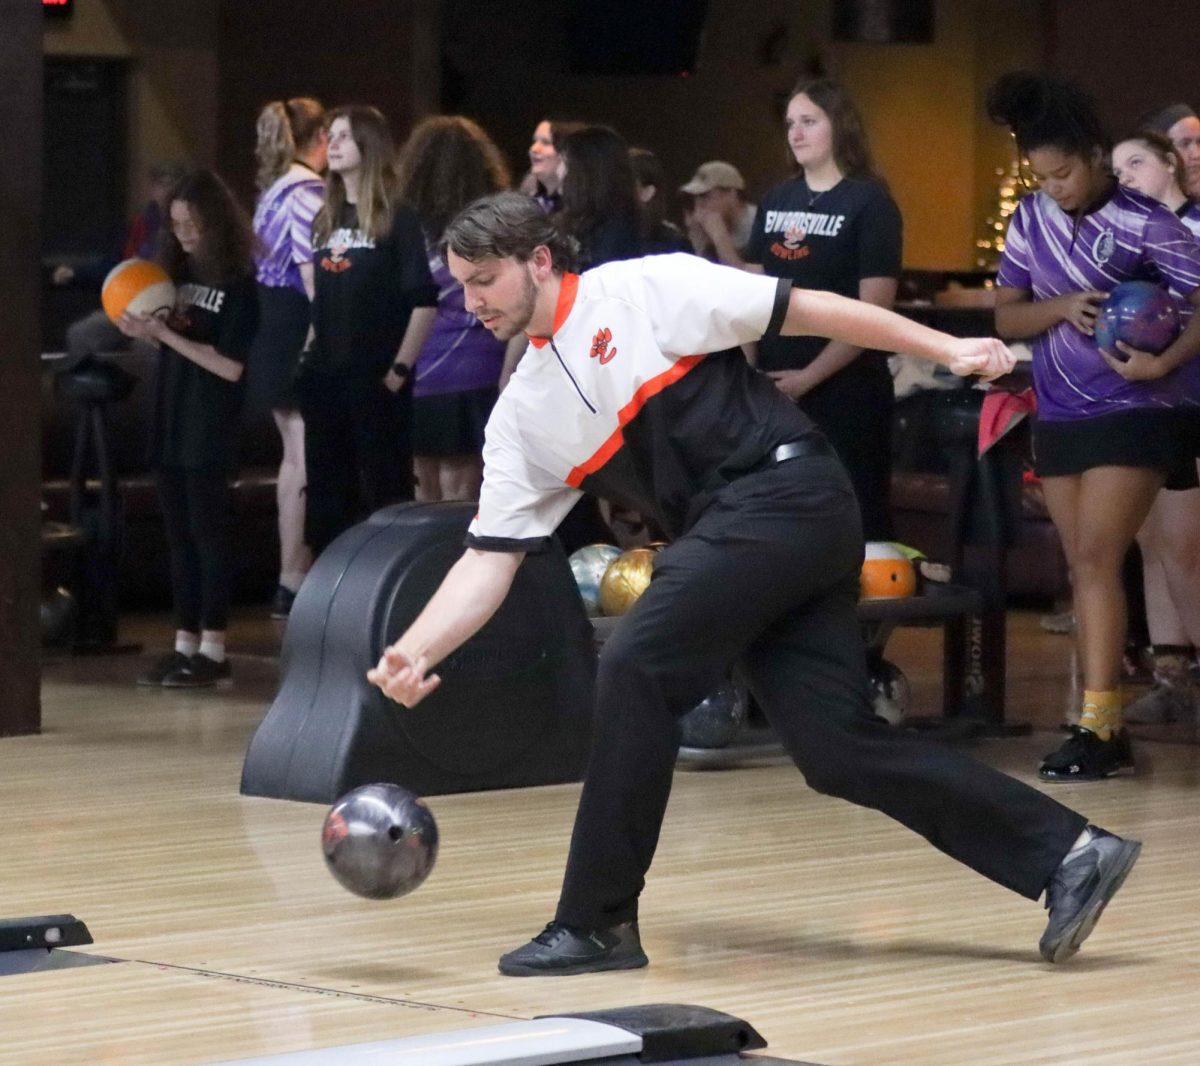 Senior+Nevin+Guetterman+bowls+at+a+competition+against+Collinsville+on+Dec.+13.